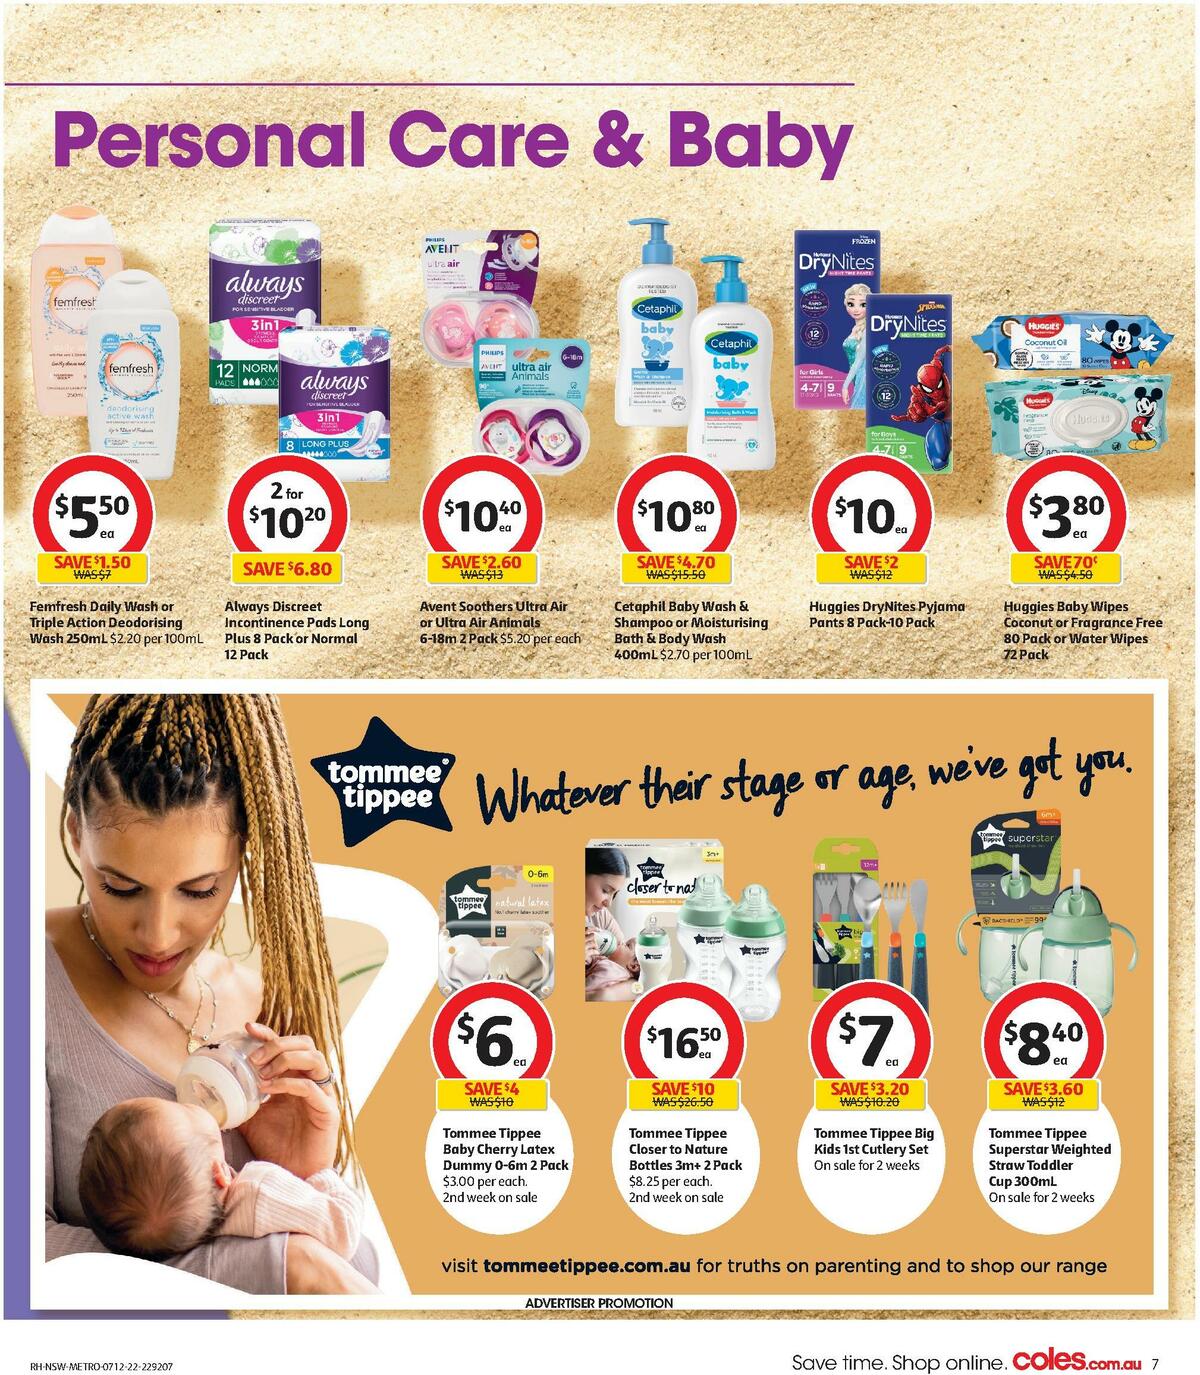 Coles Health & Beauty Catalogues from 7 December